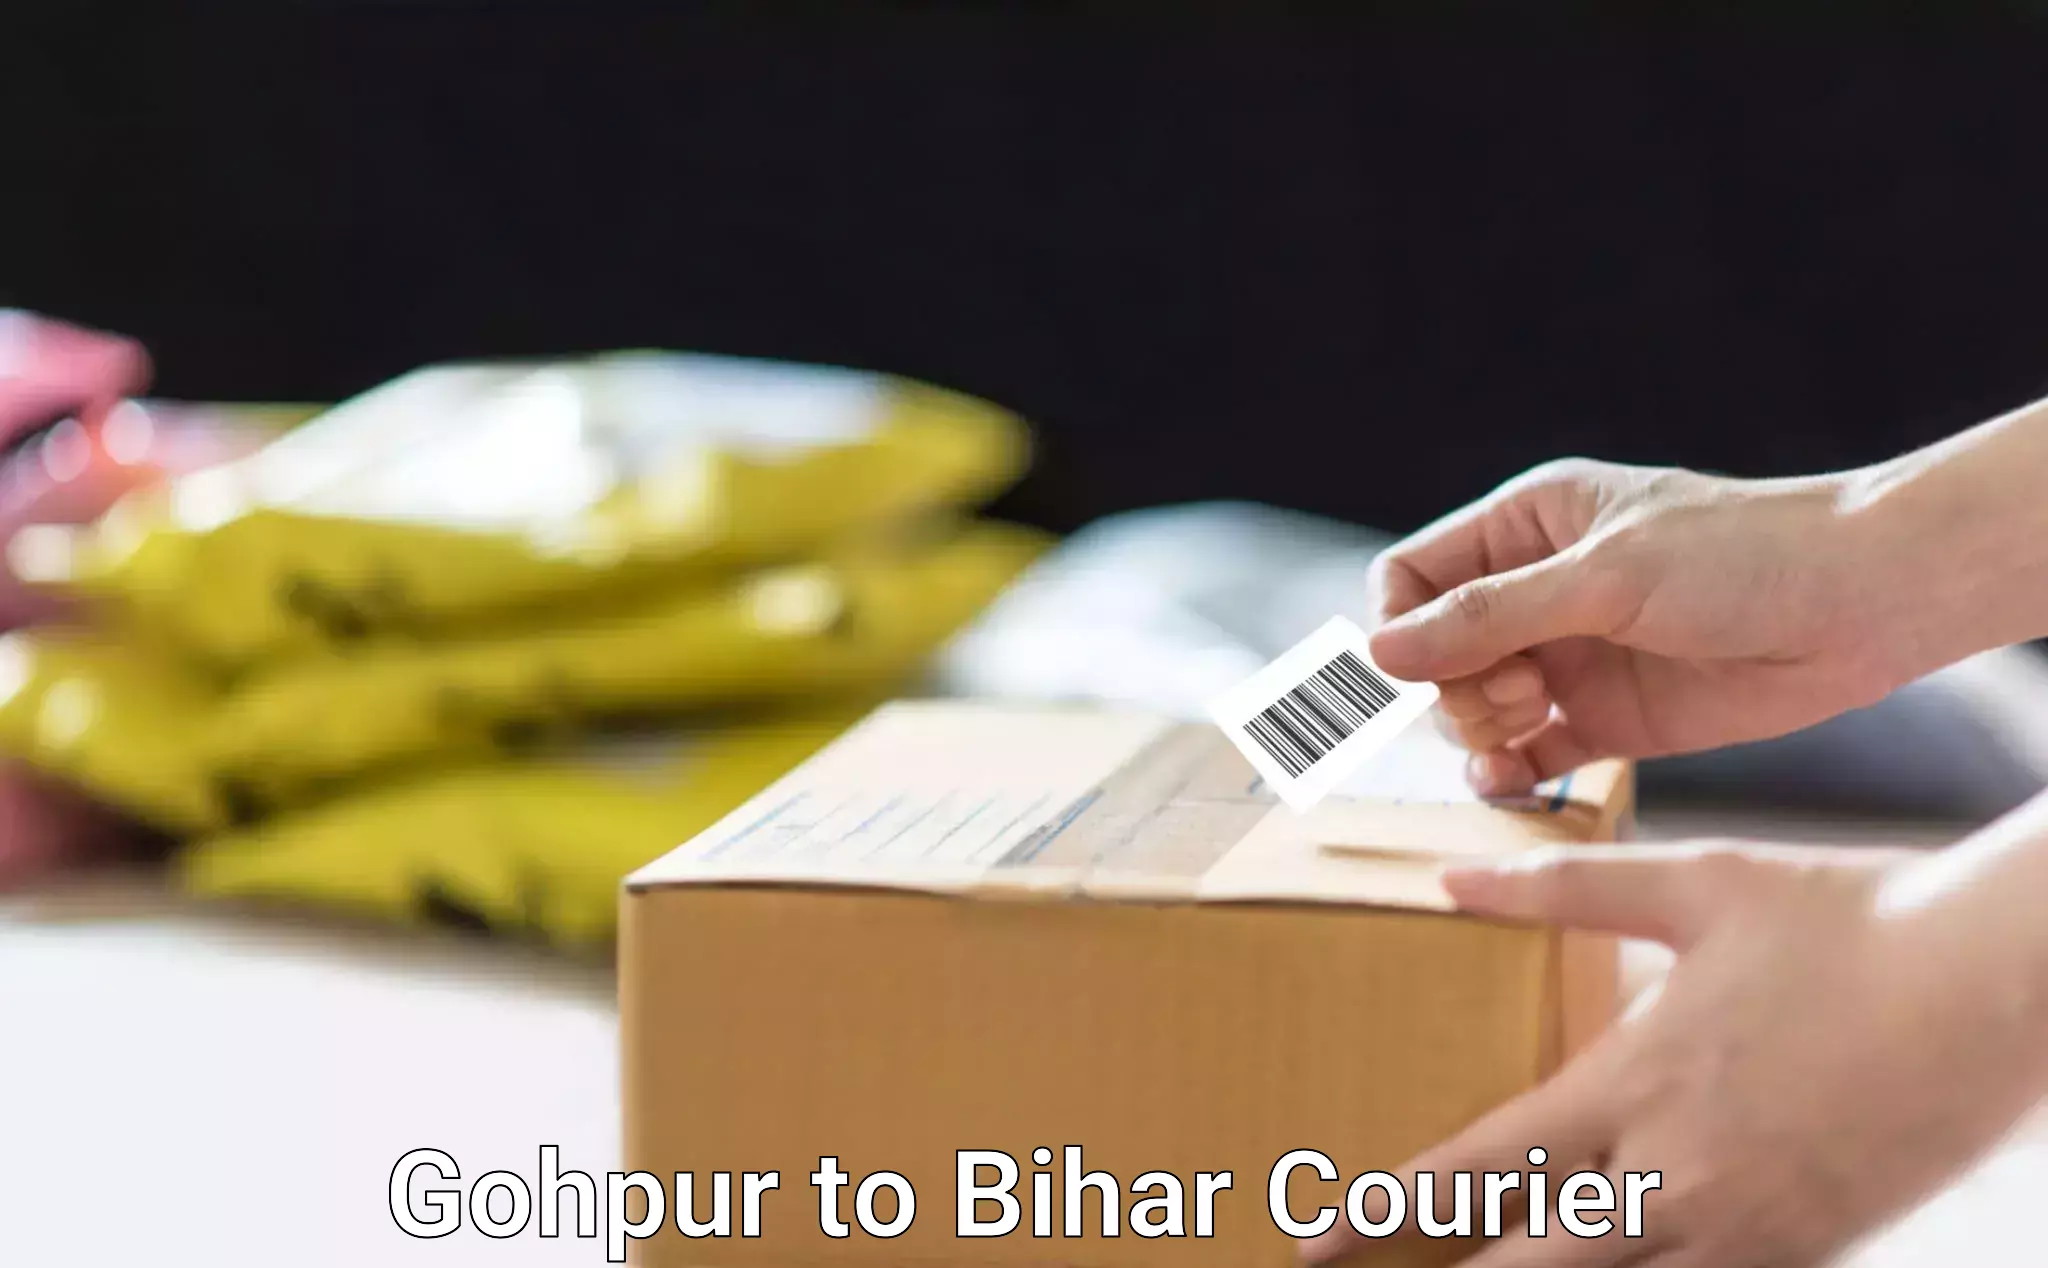 Reliable courier service Gohpur to Mairwa